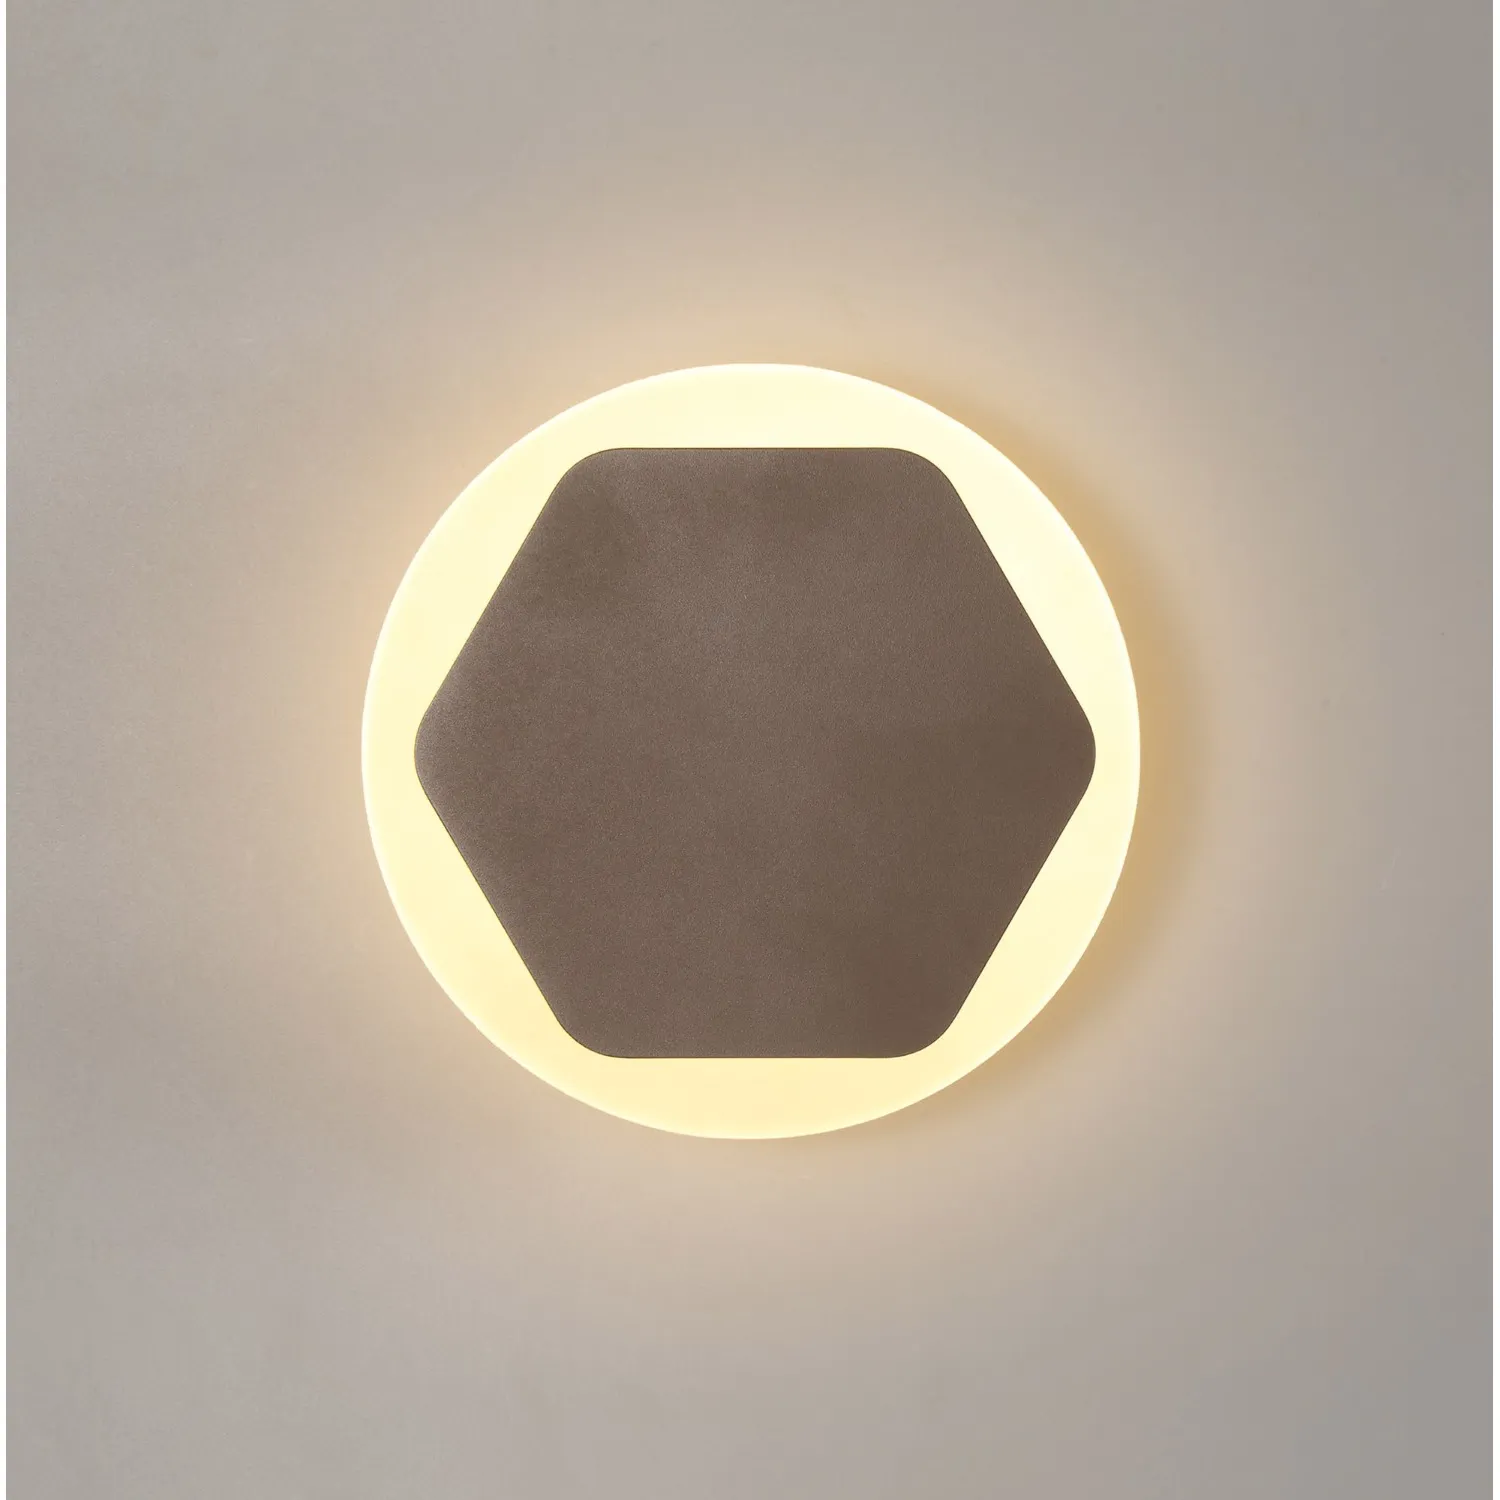 Edgware Magnetic Base Wall Lamp, 12W LED 3000K 498lm, 15cm Horizontal Hexagonal 19cm Round Centre, Coffee Acrylic Frosted Diffuser